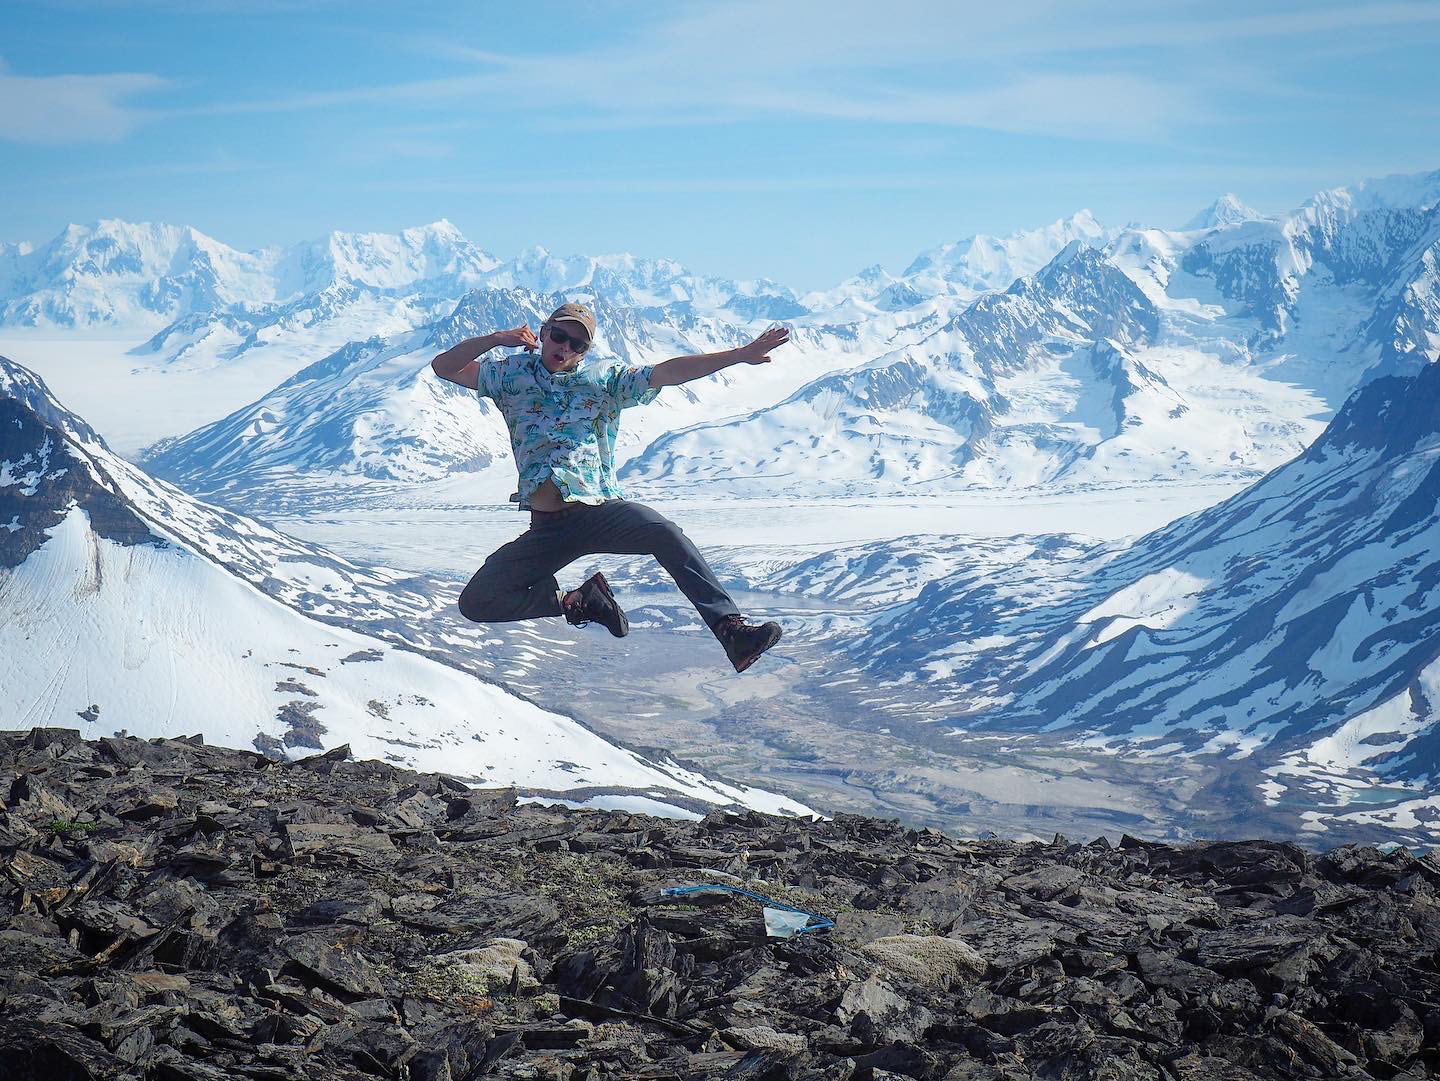 Spencer jumping in front of mountains